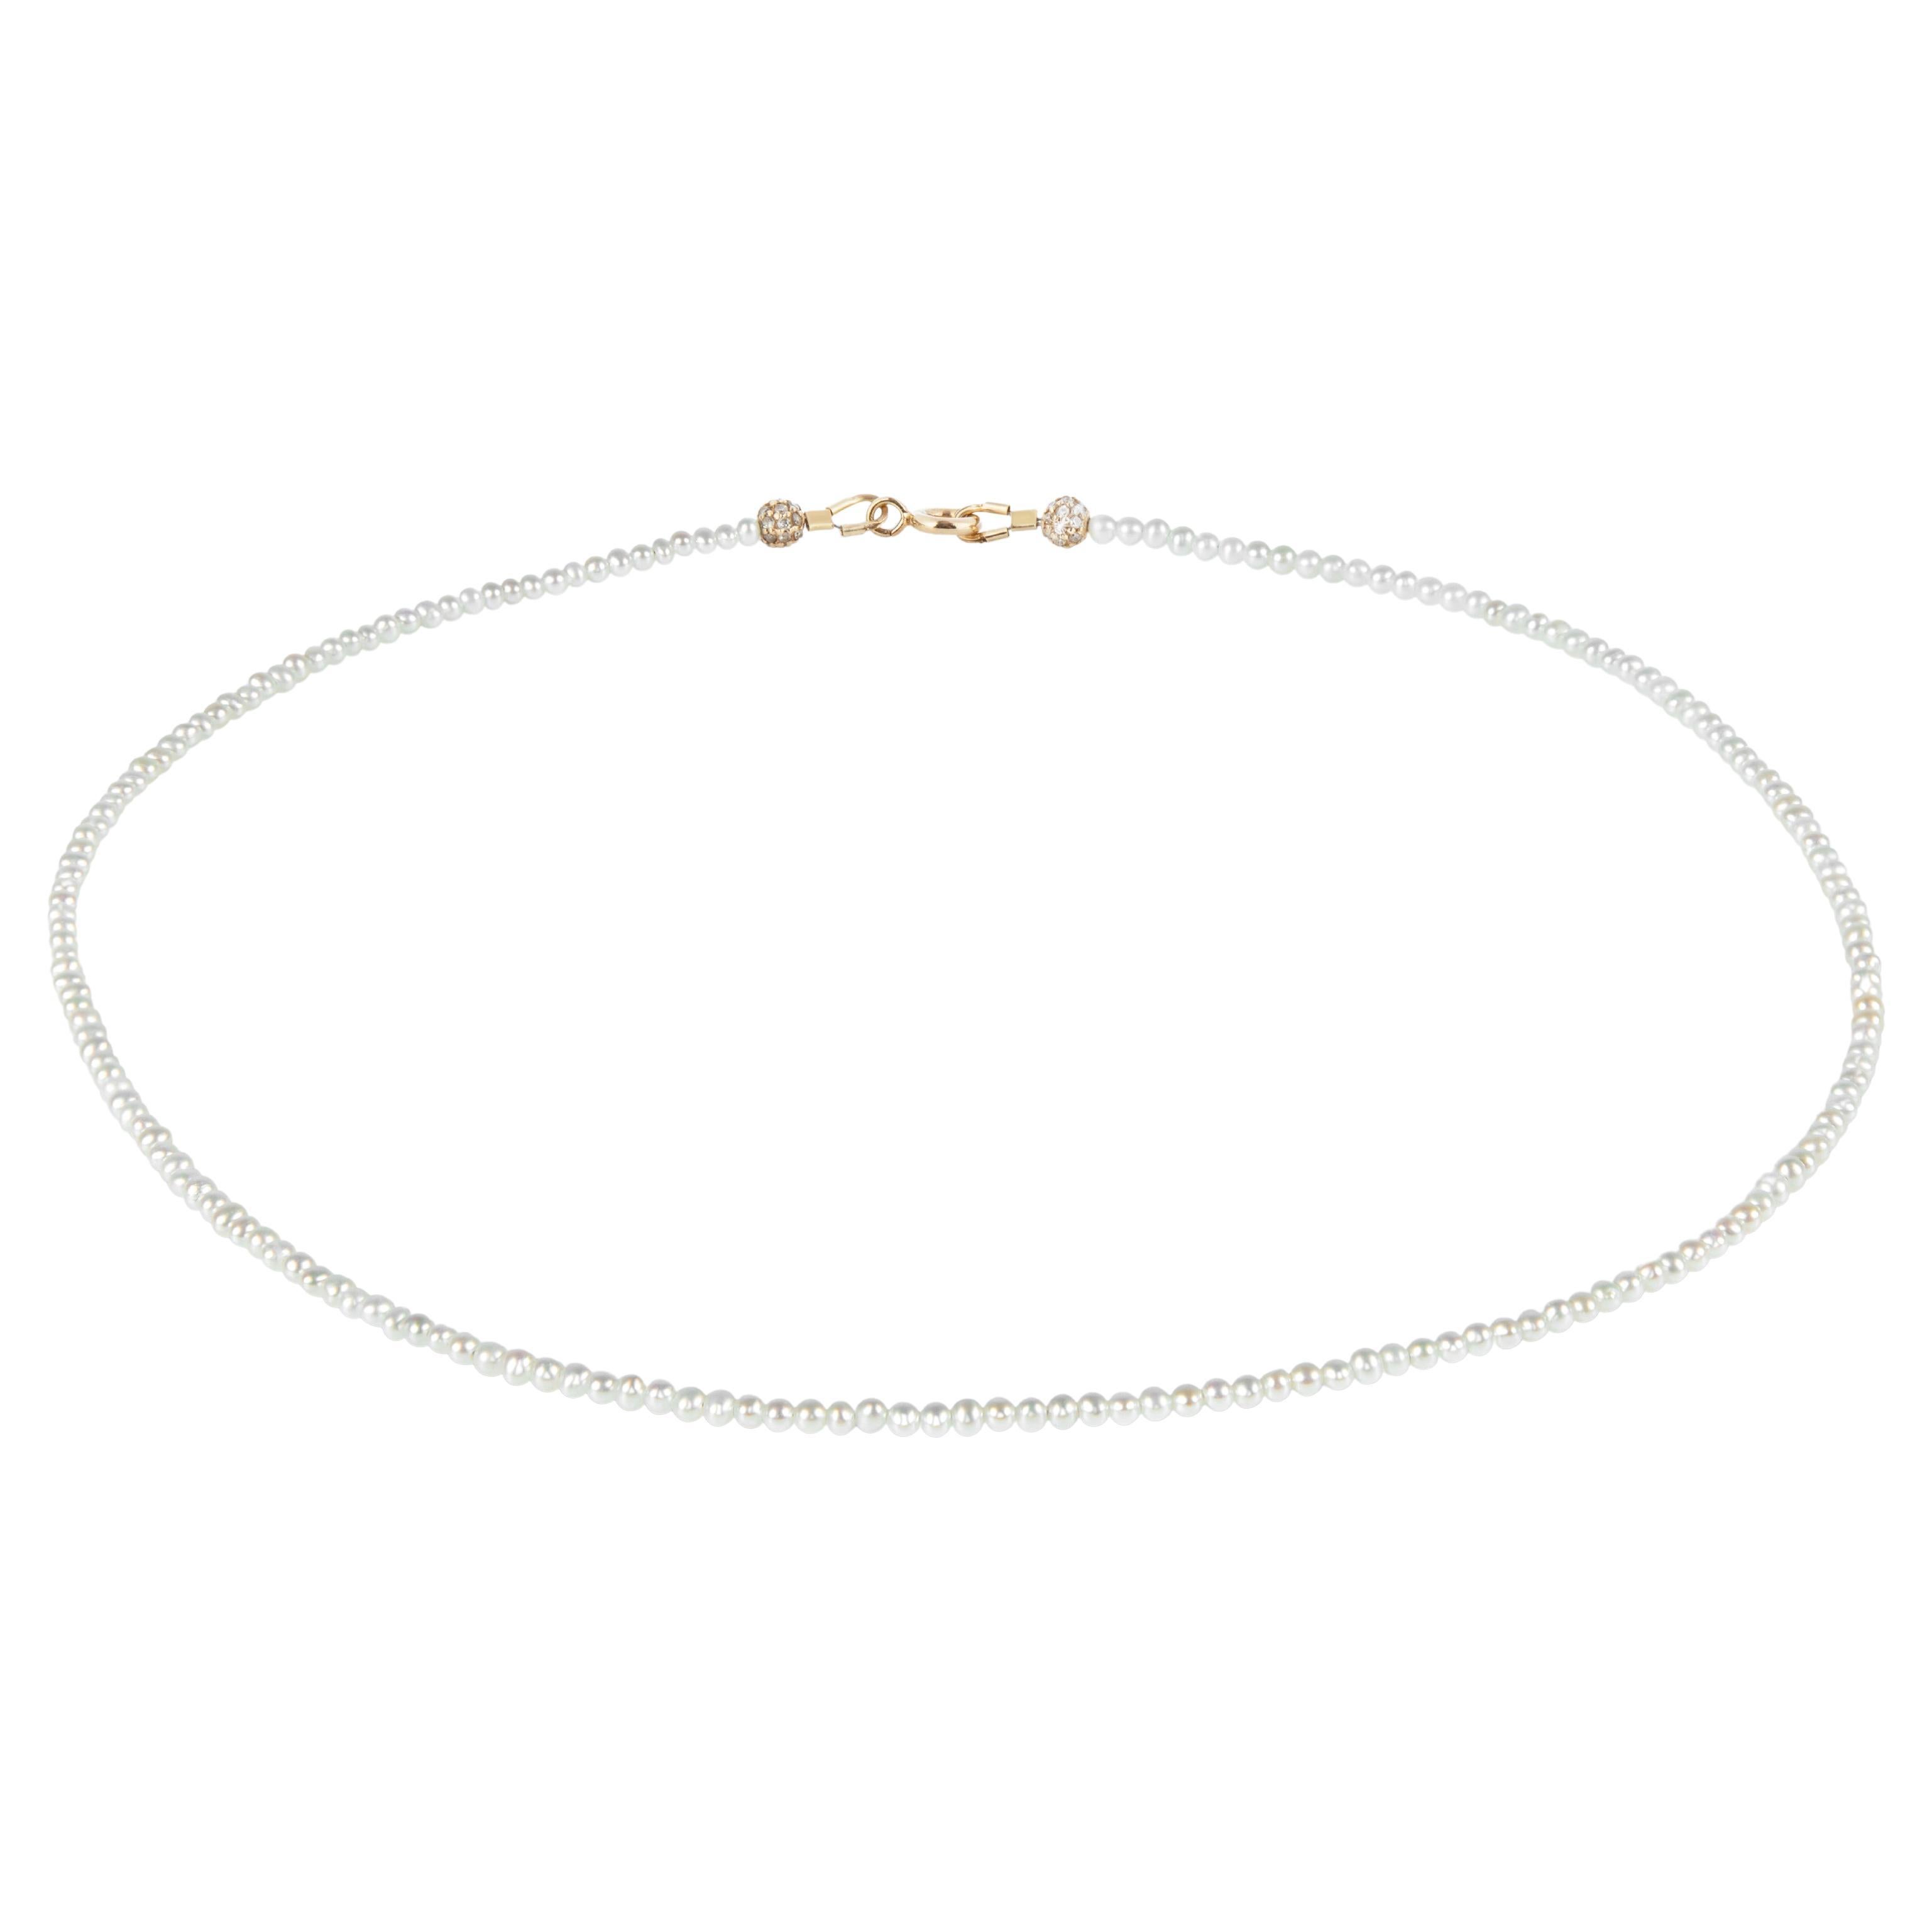 Delicate white freshwater pearl necklace with 14k gold closure